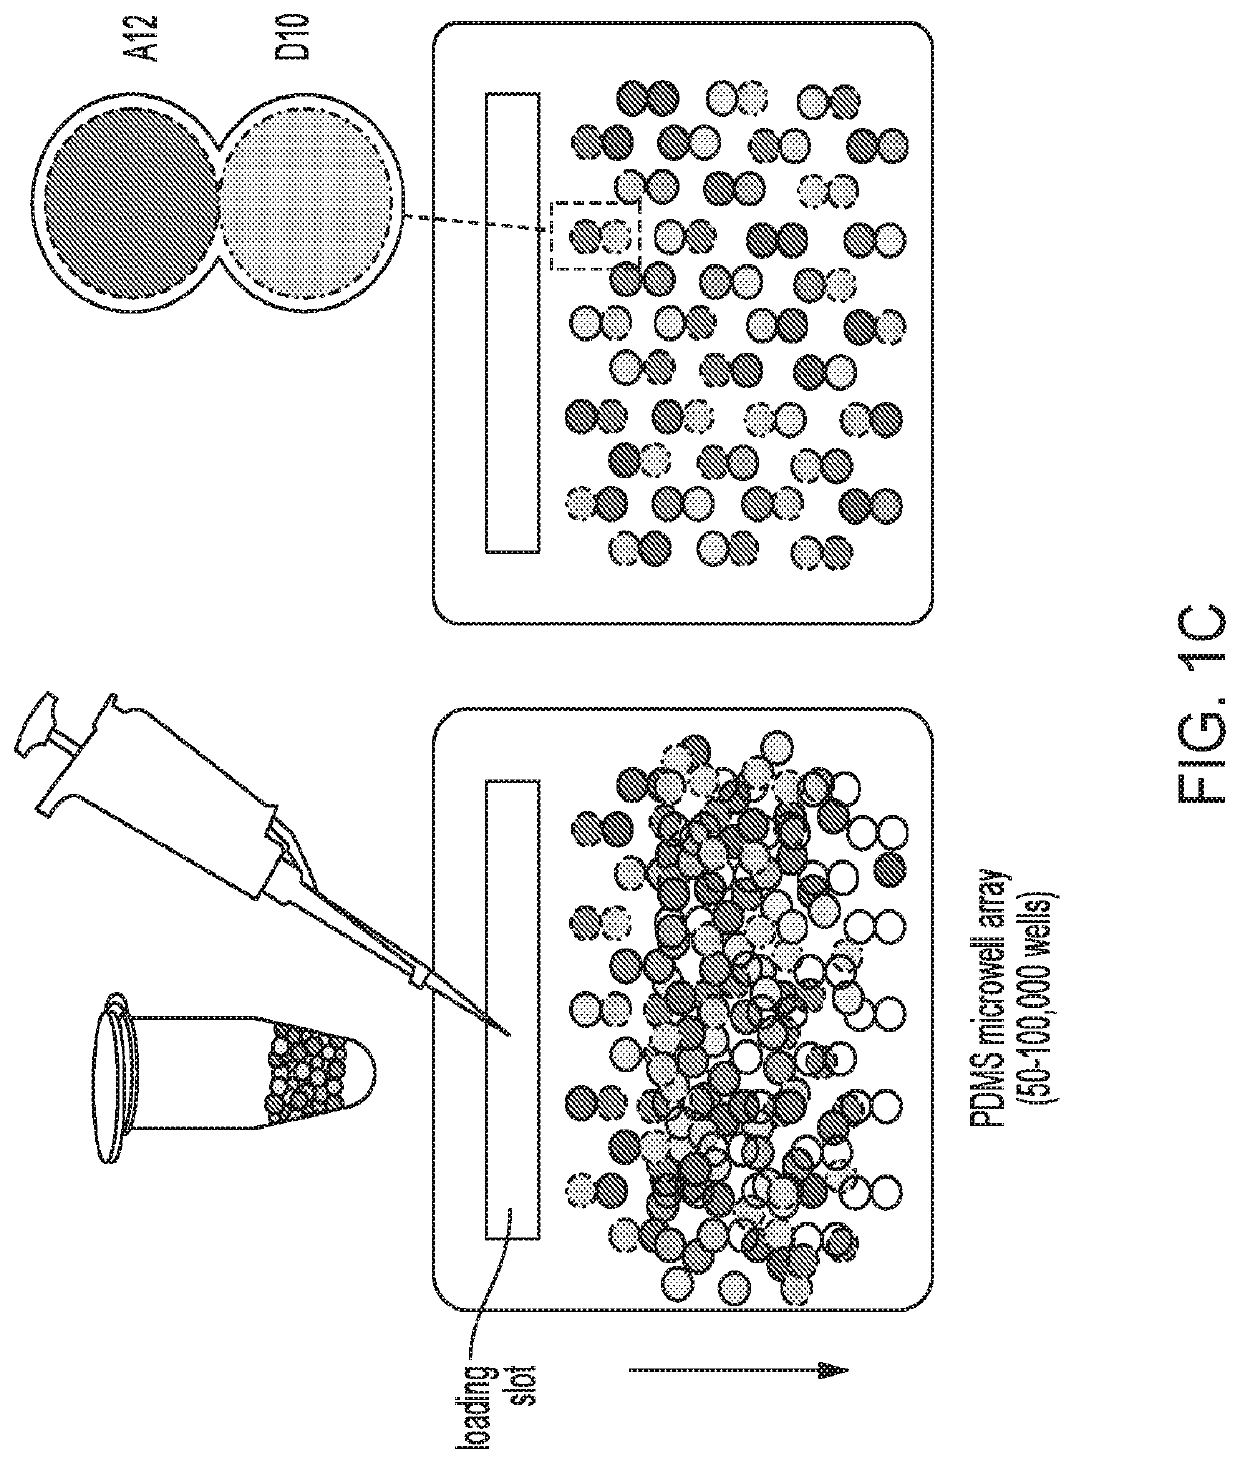 Compositions and methods for combinatorial drug discovery in nanoliter droplets